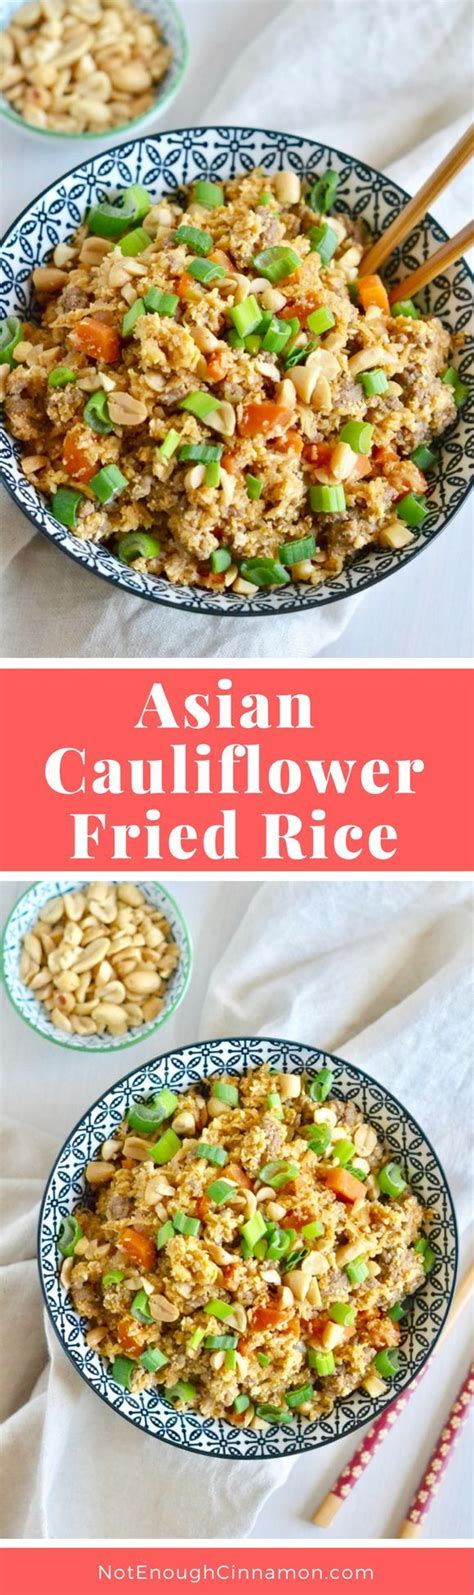 So while i'd never recommend normal fried rice as a meal, cauliflower fried. Asian Cauliflower Fried Rice | Recipe | Food recipes ...